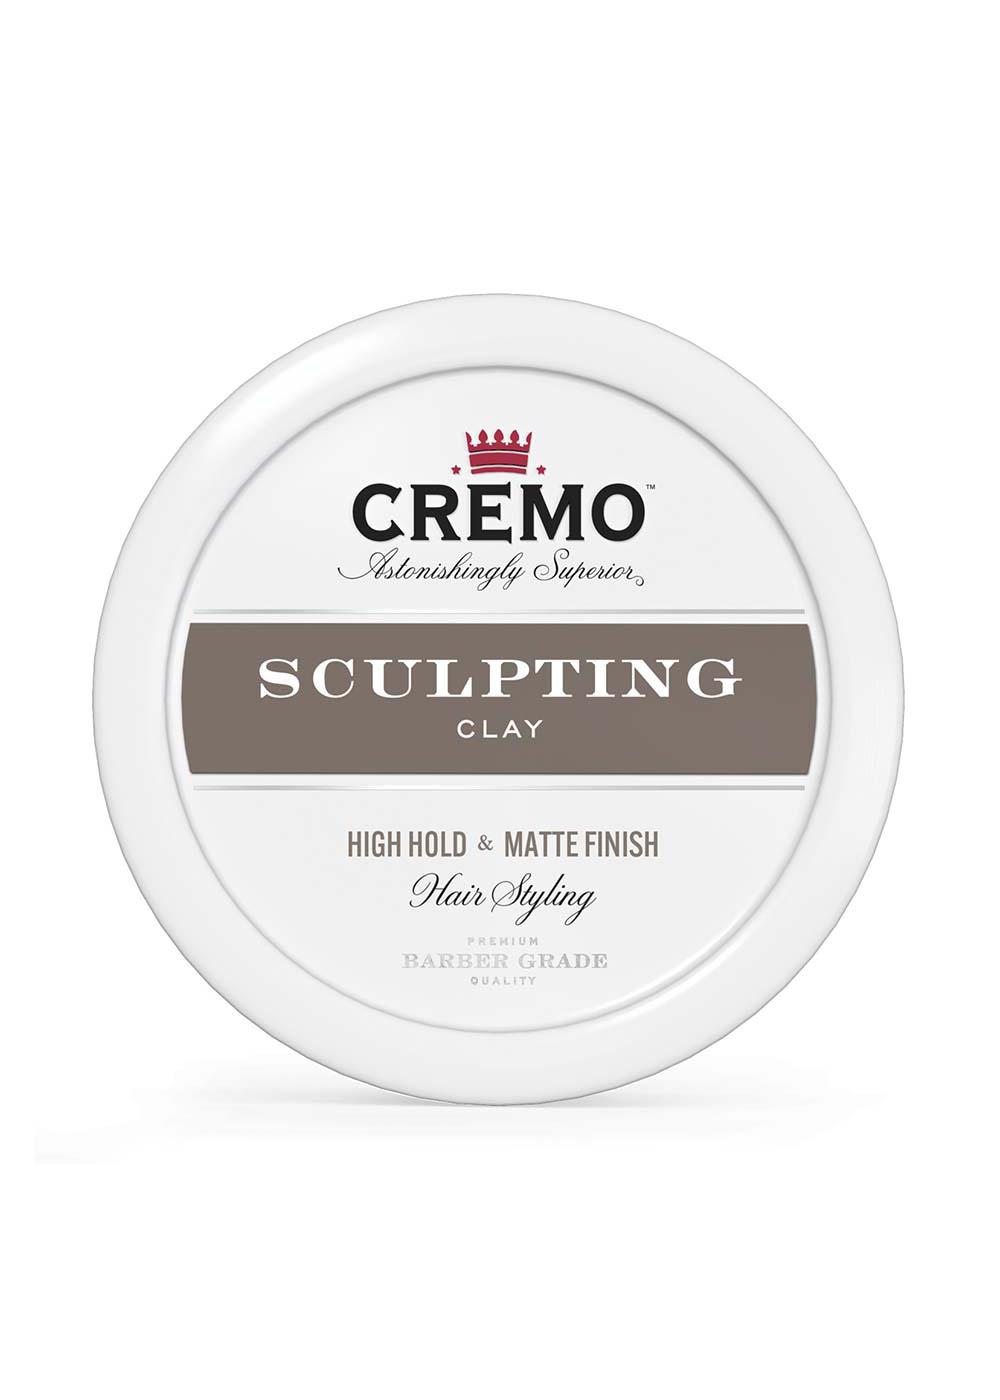 Cremo Hair Styling Pomade - Sculpting; image 1 of 3